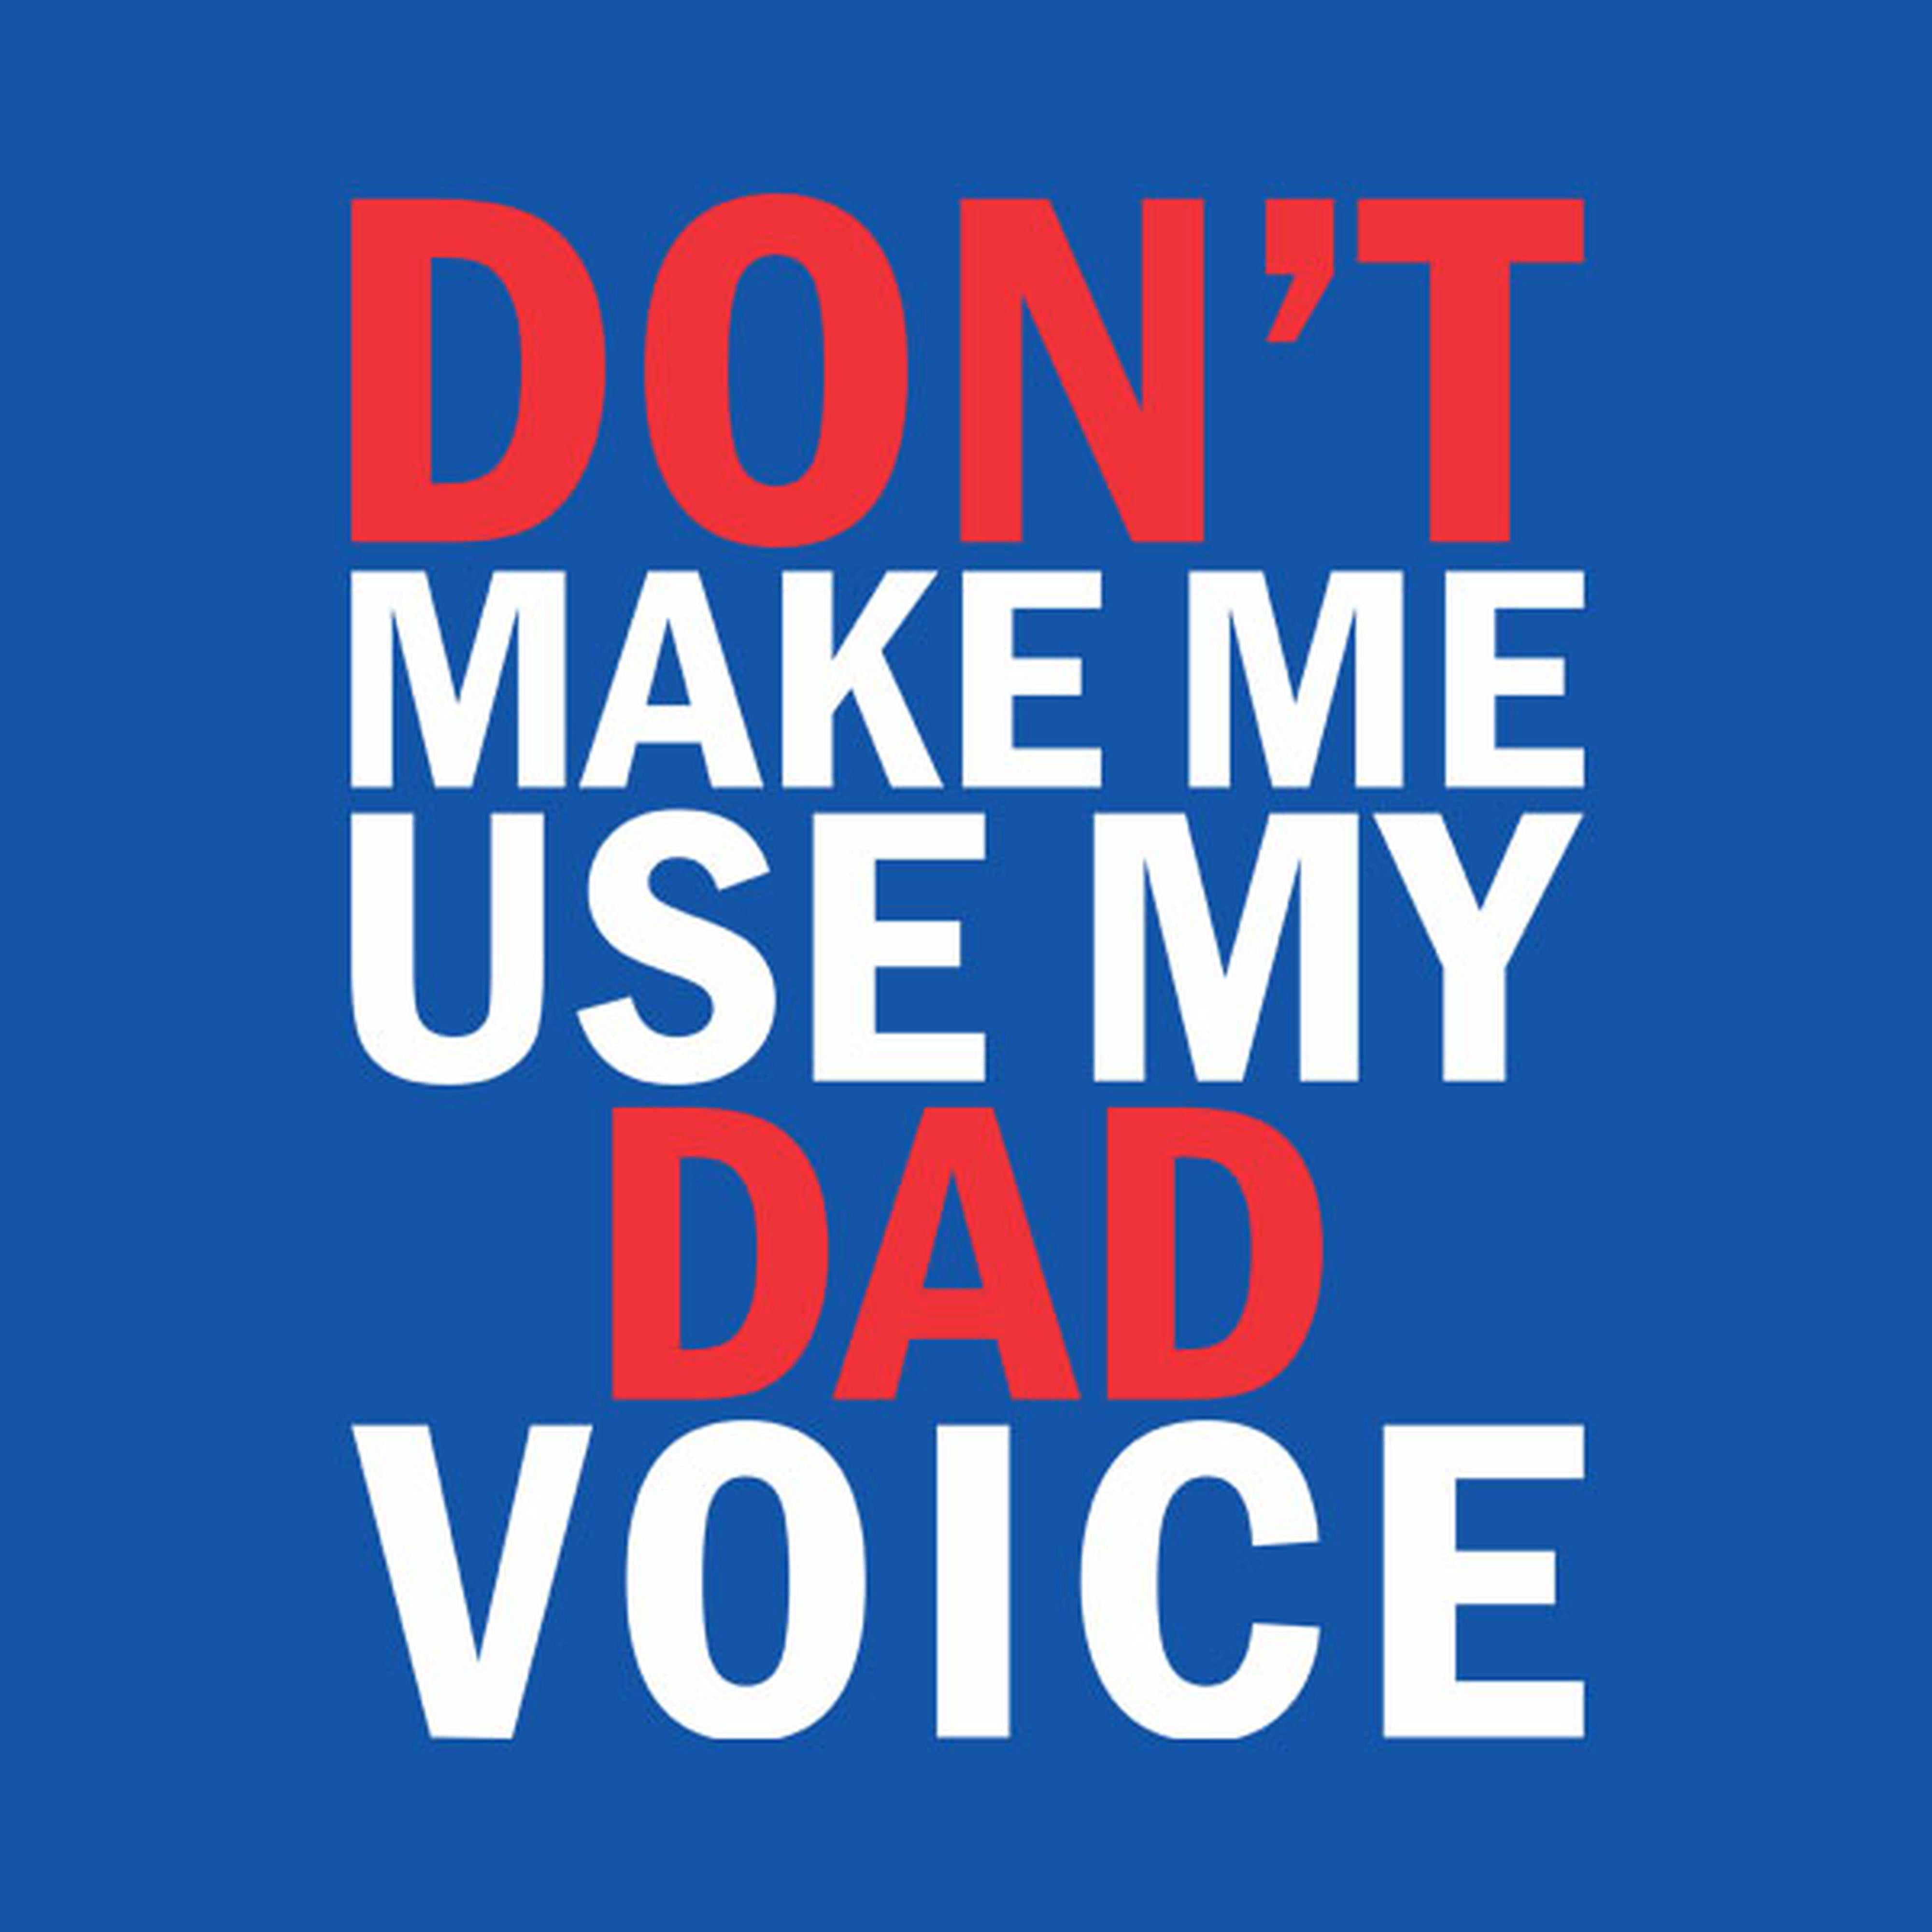 Don't make me use my DAD voice